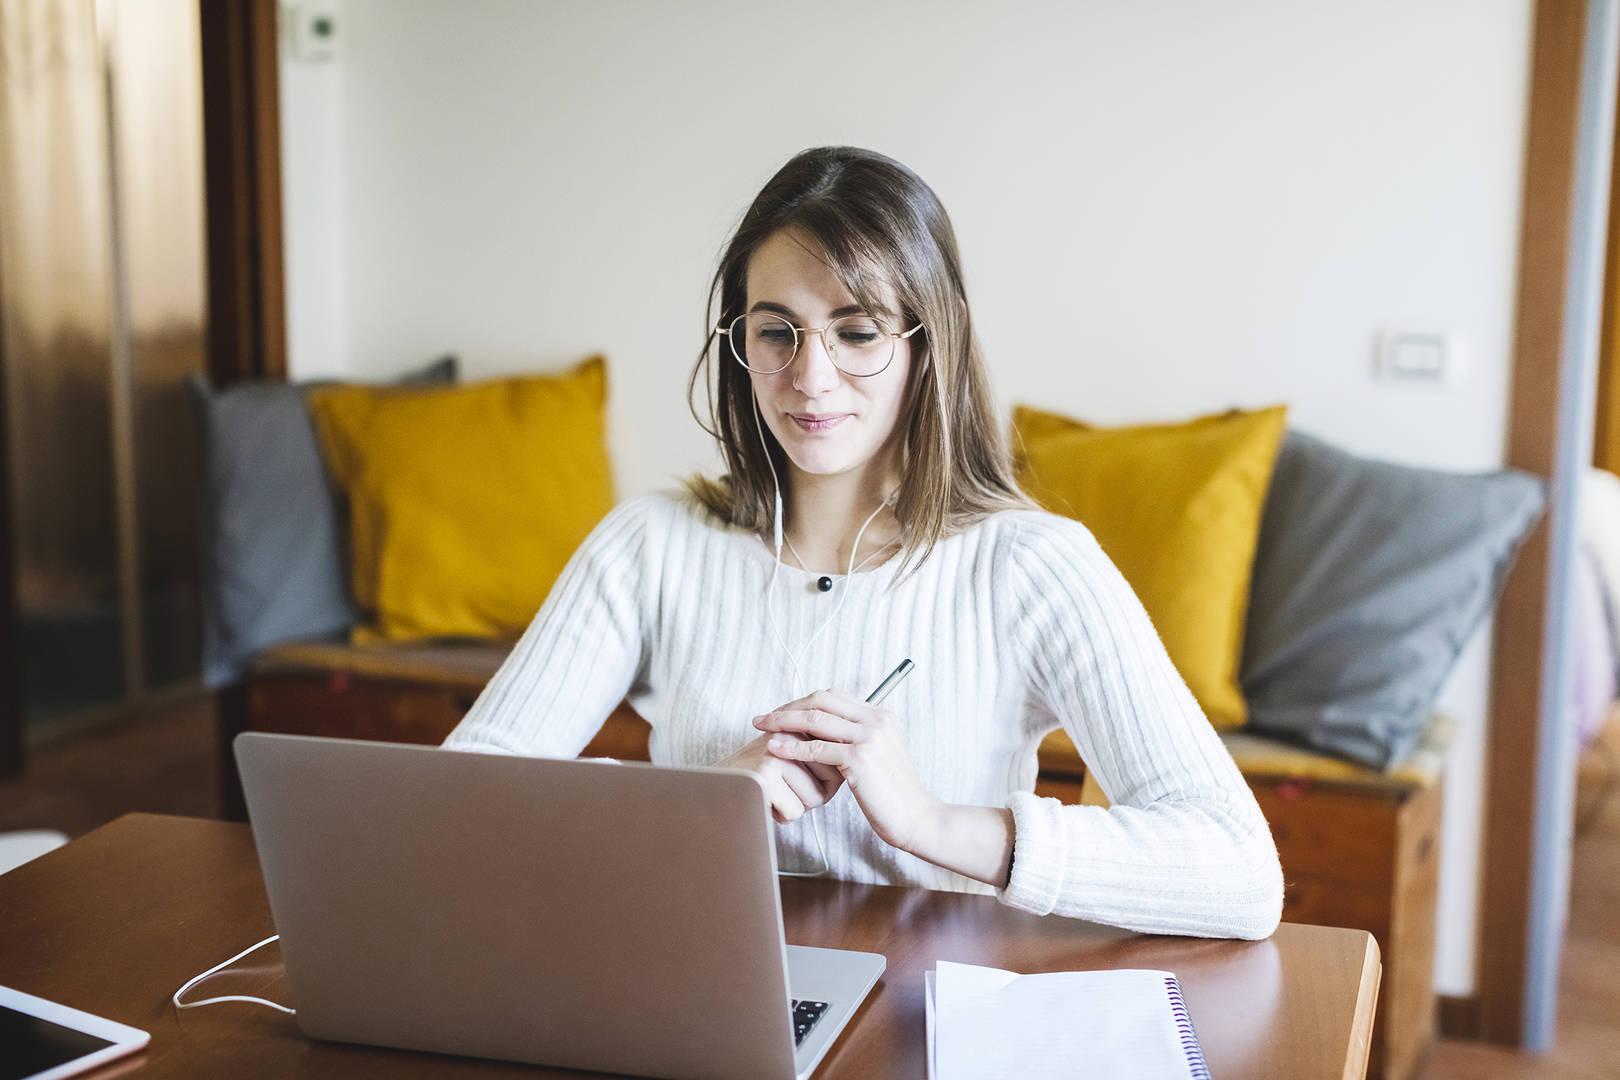 a young woman looks at a computer while at home